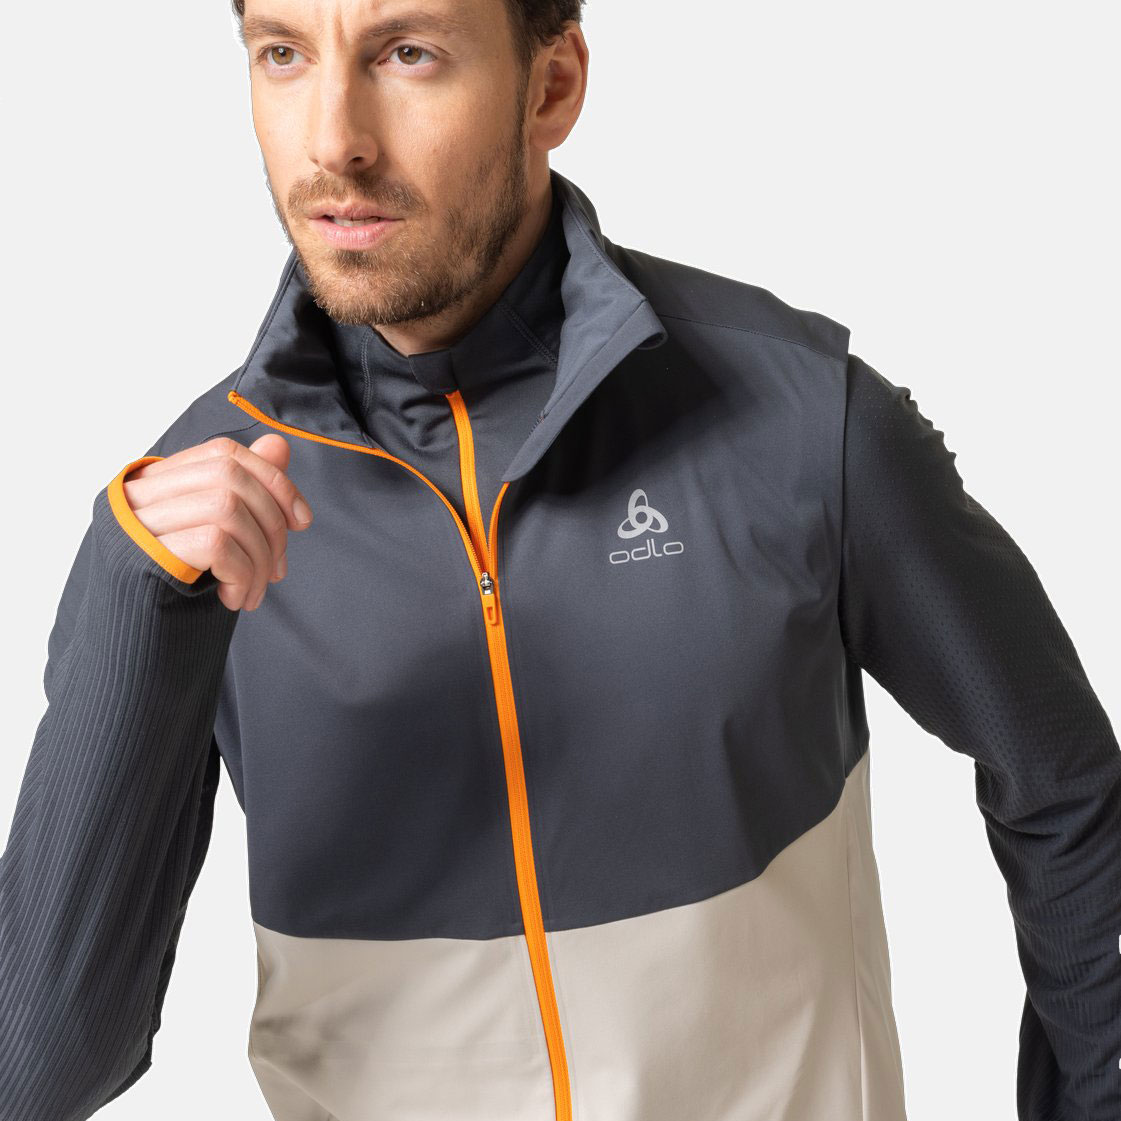 Odlo Gilet Running Homme - Zeroweight Warm - silver cloud - india